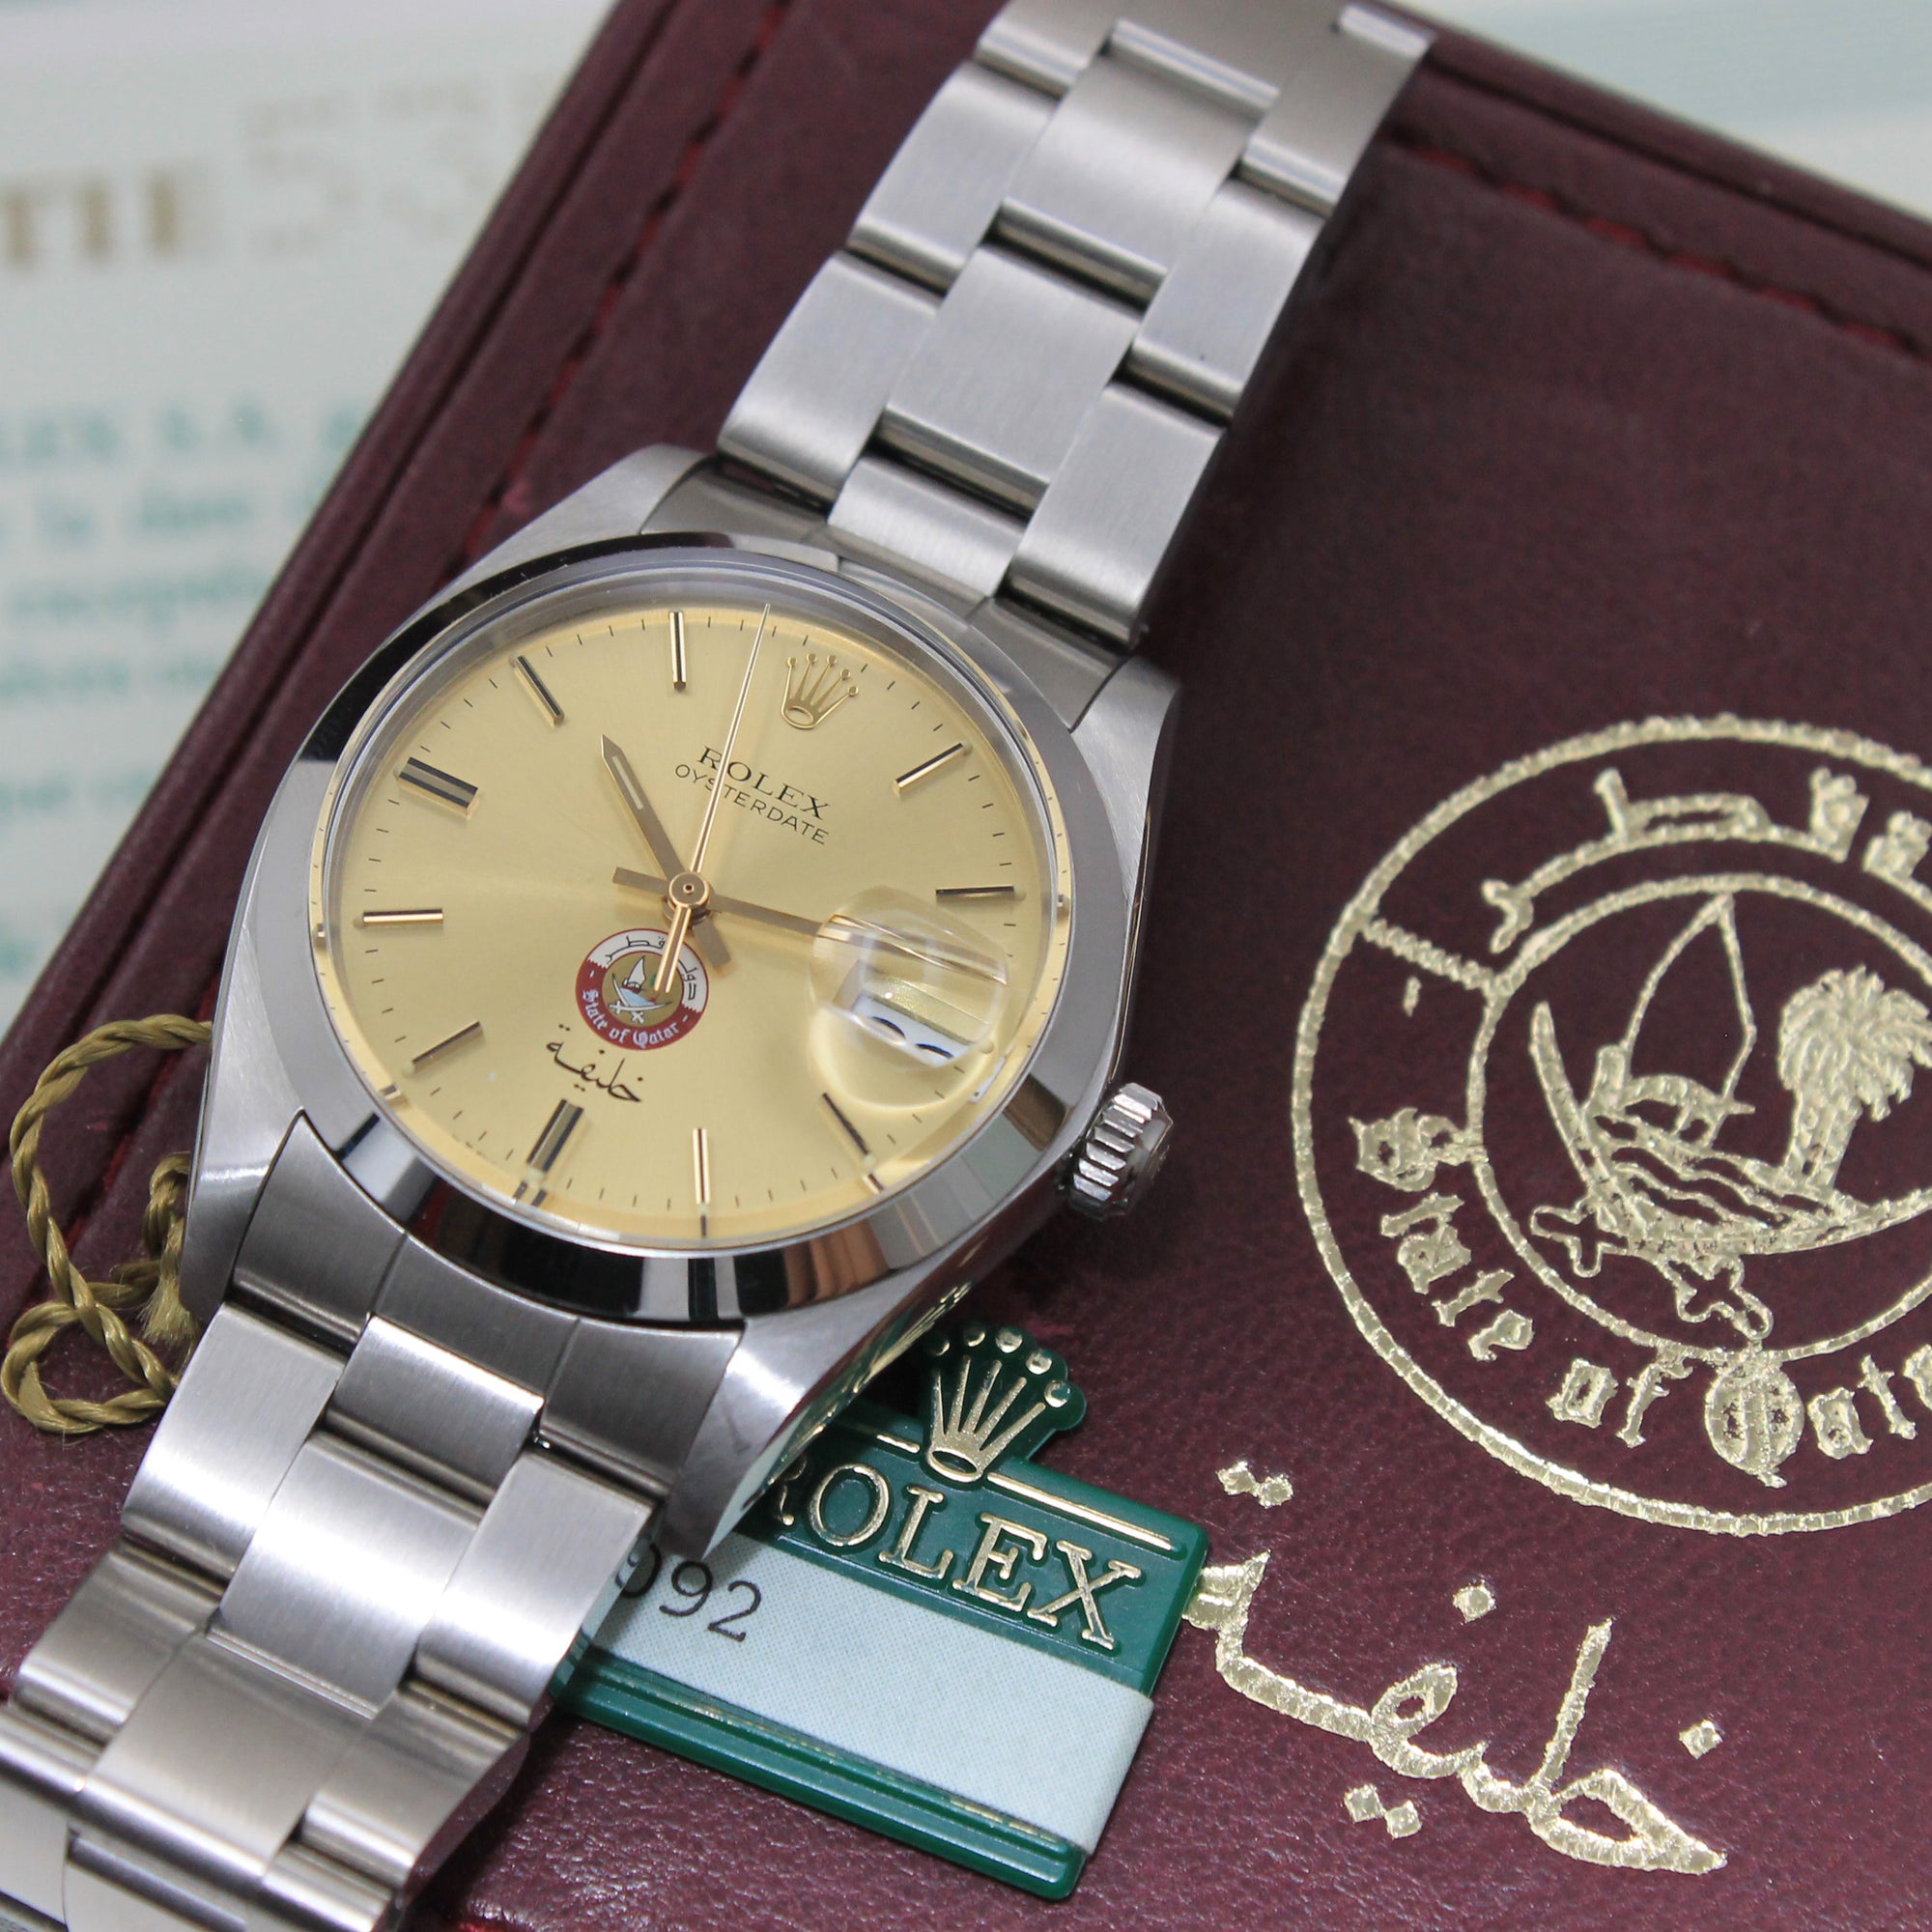 Vintage Watches and the Ever-Elusive “New Old Stock”